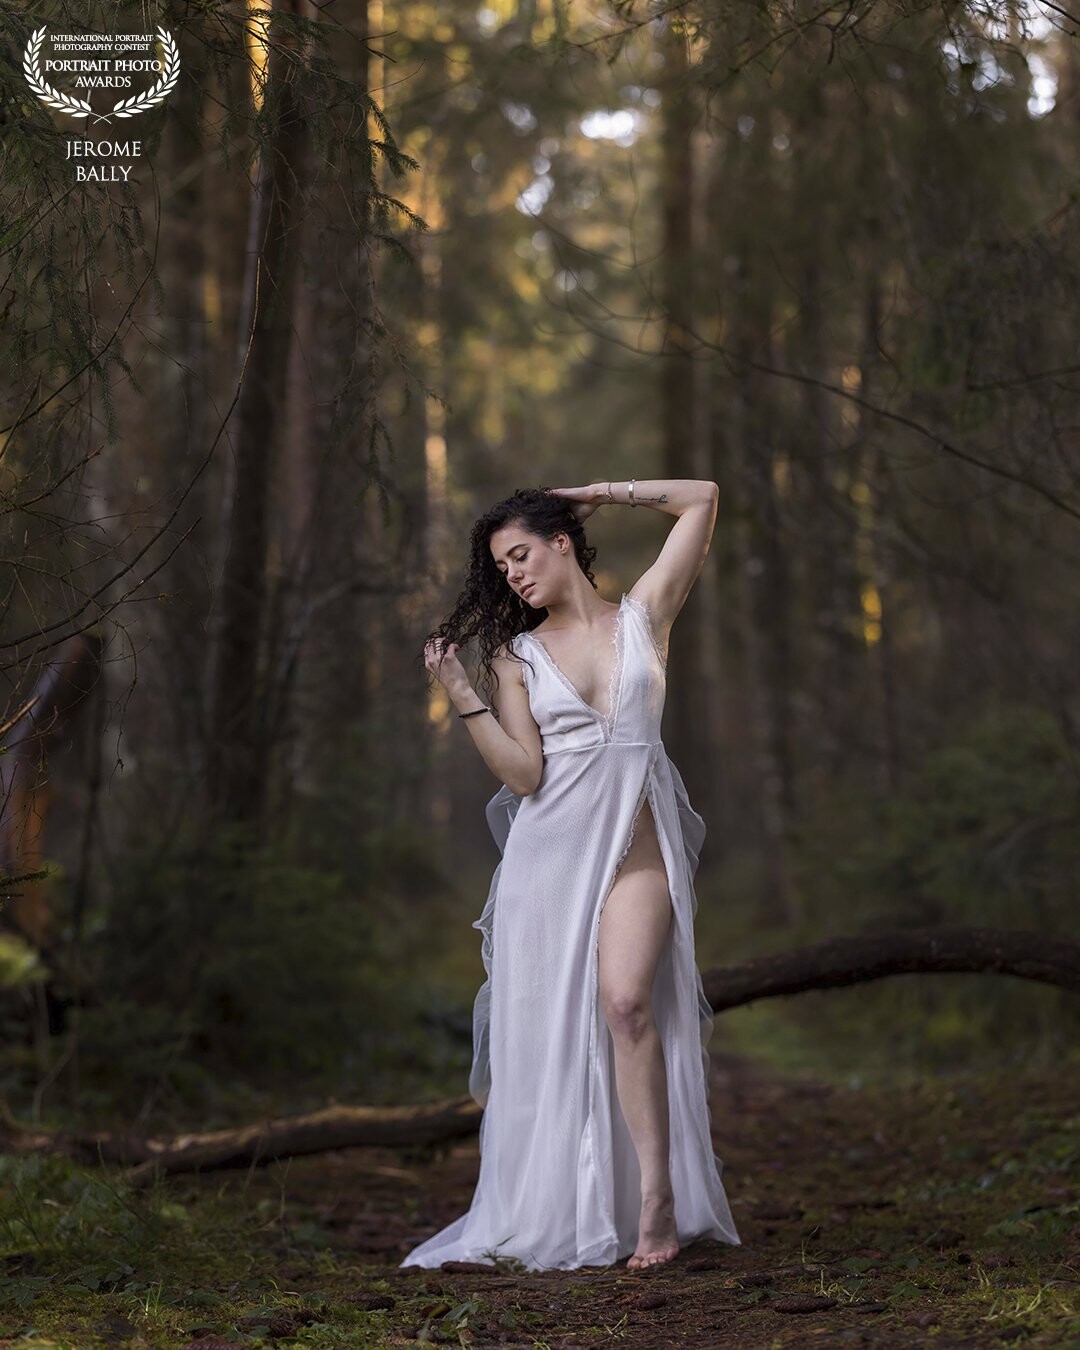 What a superbe start in the new year. We had the idea to start 2022 with a shooting in the nearby forest. Fabienne (@fab__ella) and myself found this spot with a light setup that suited her fairy dress